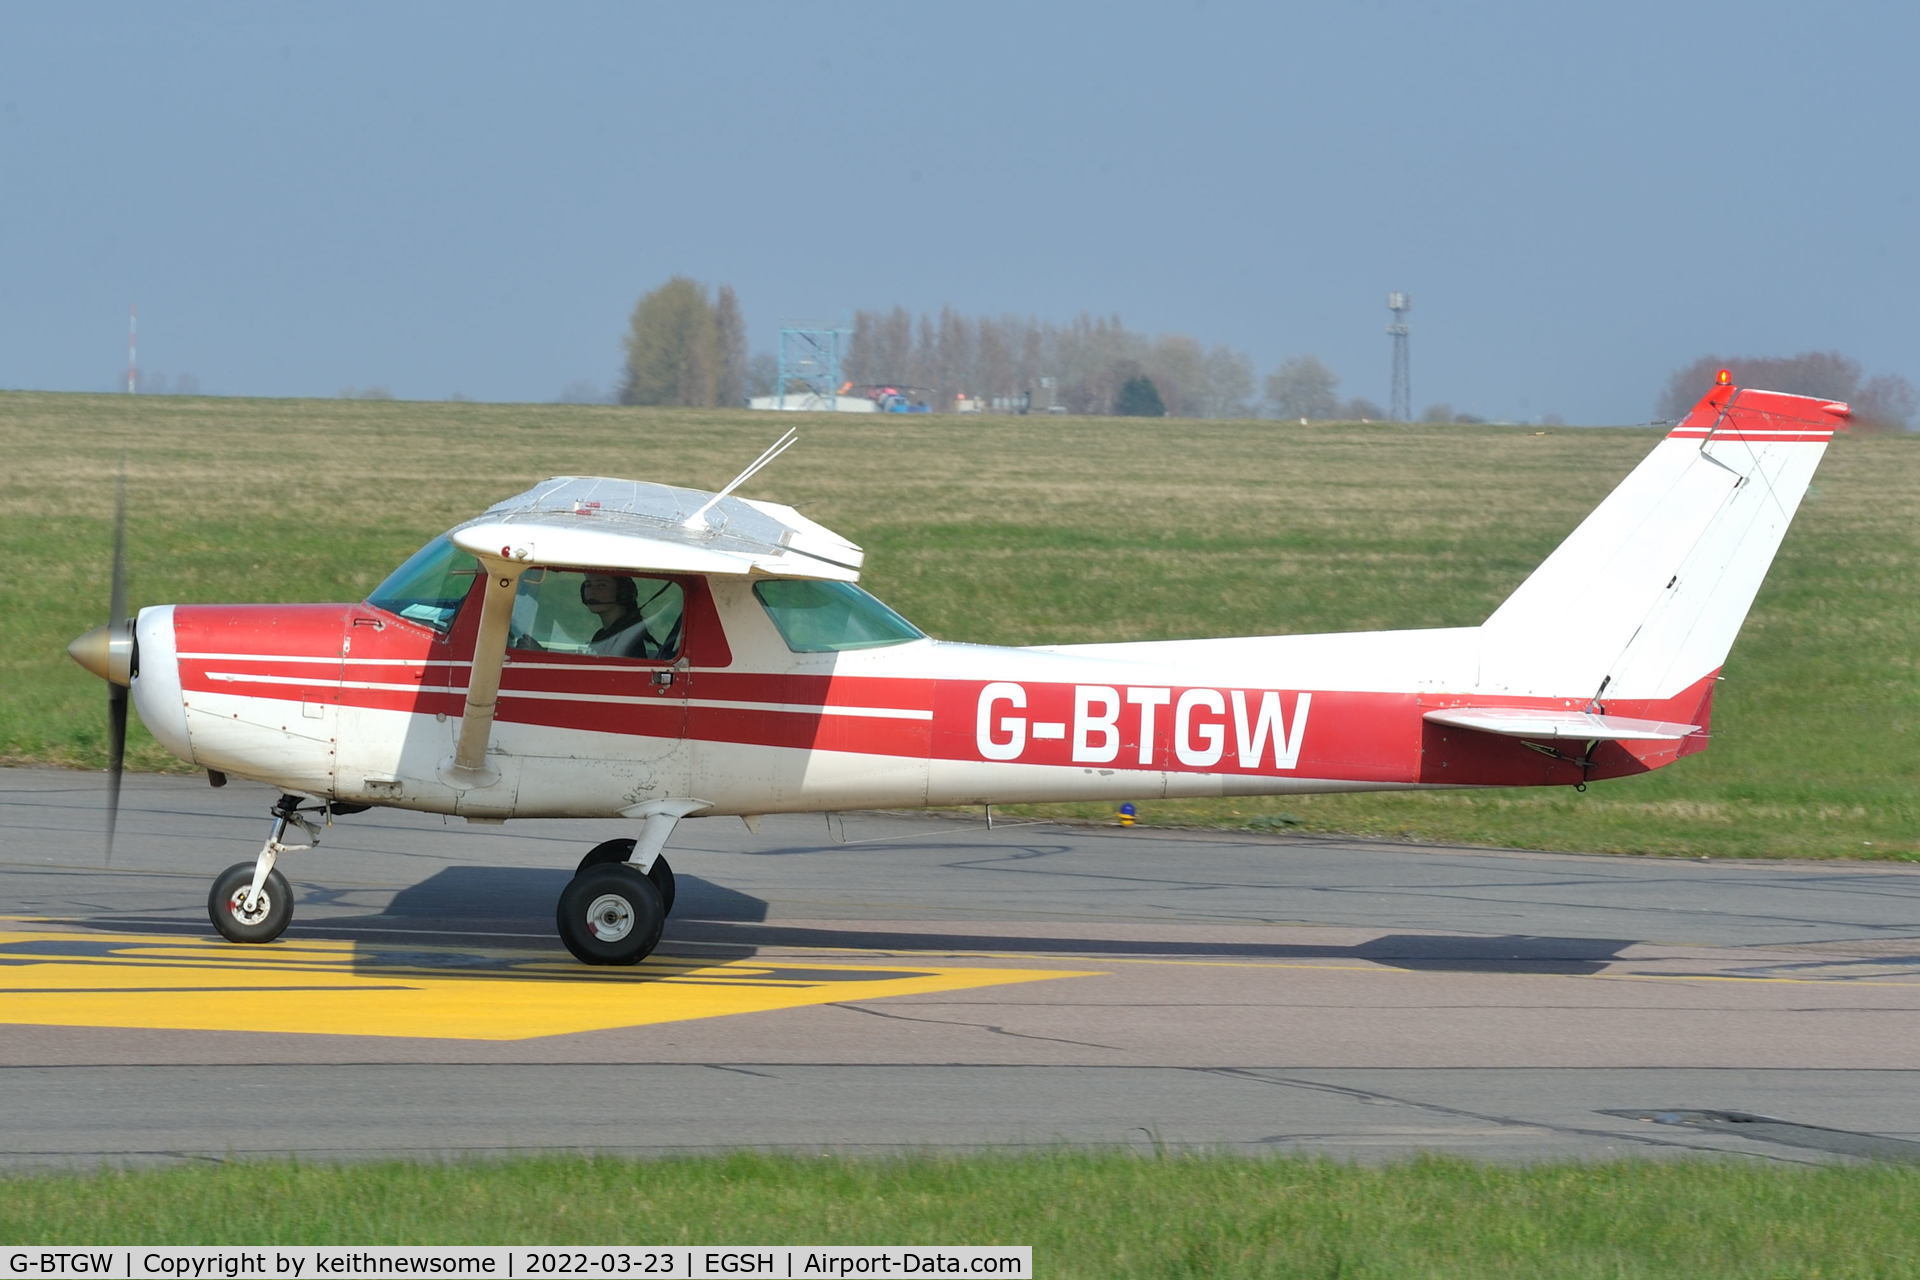 G-BTGW, 1979 Cessna 152 C/N 15279812, Arriving at Norwich from Stapleford.